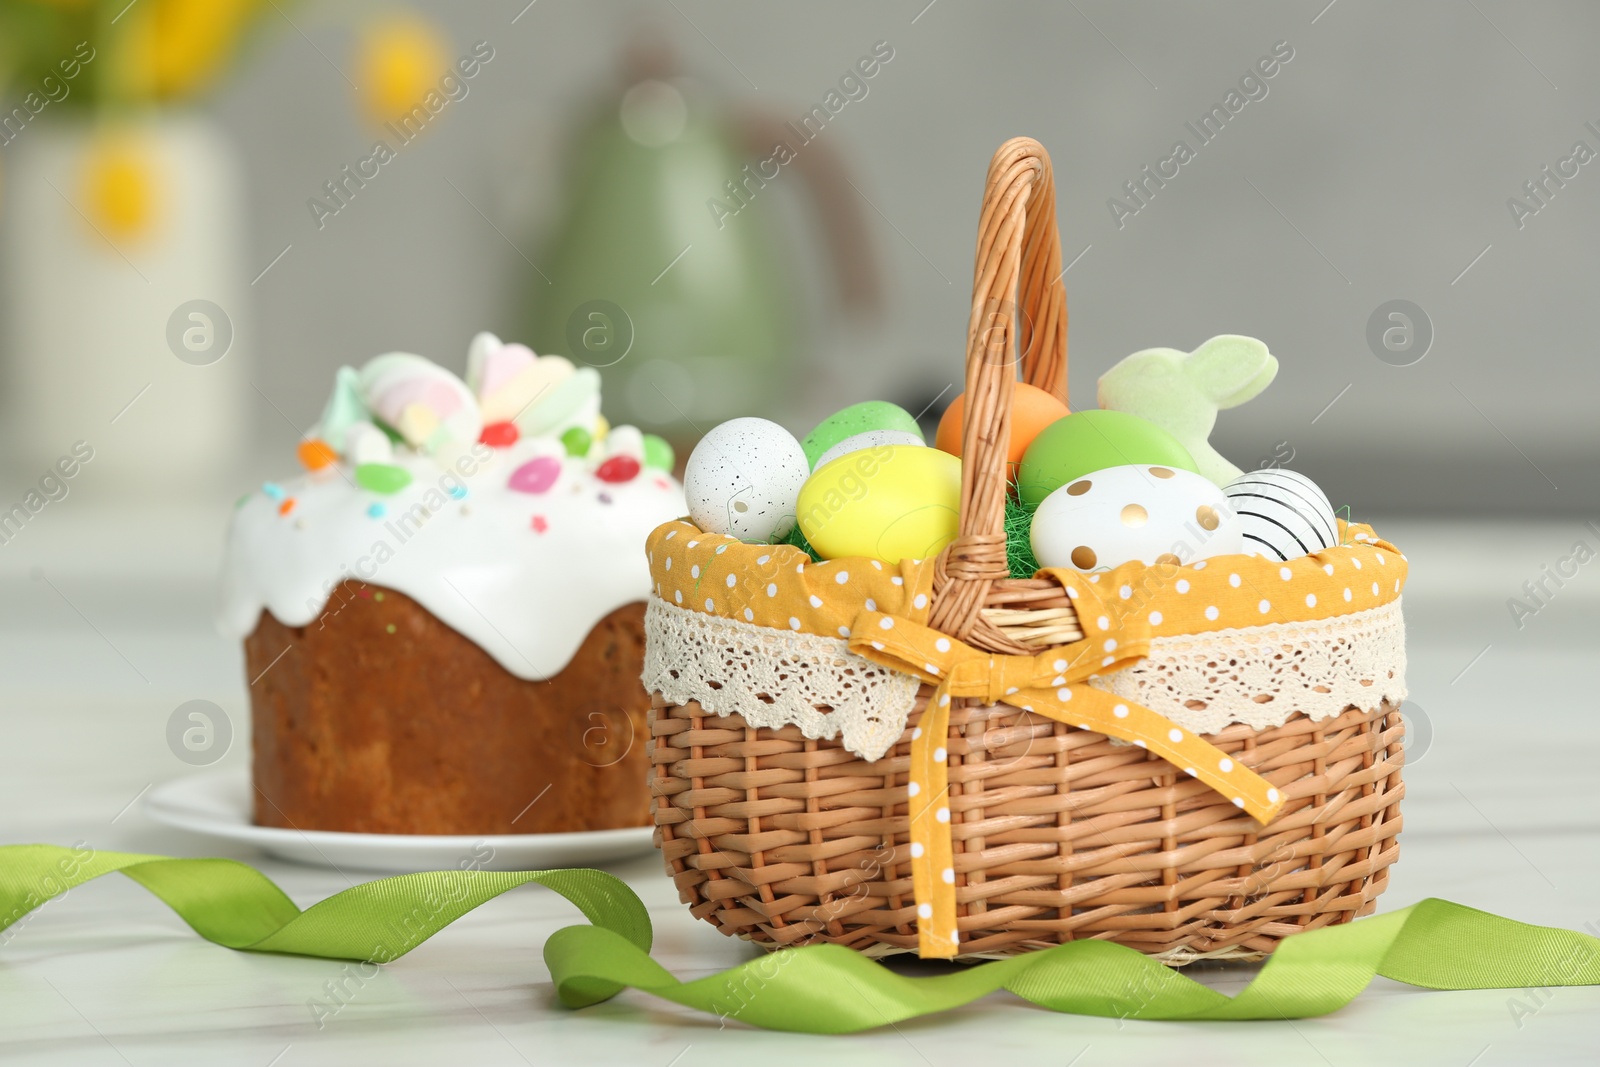 Photo of Easter basket with painted eggs near tasty cake on white marble table